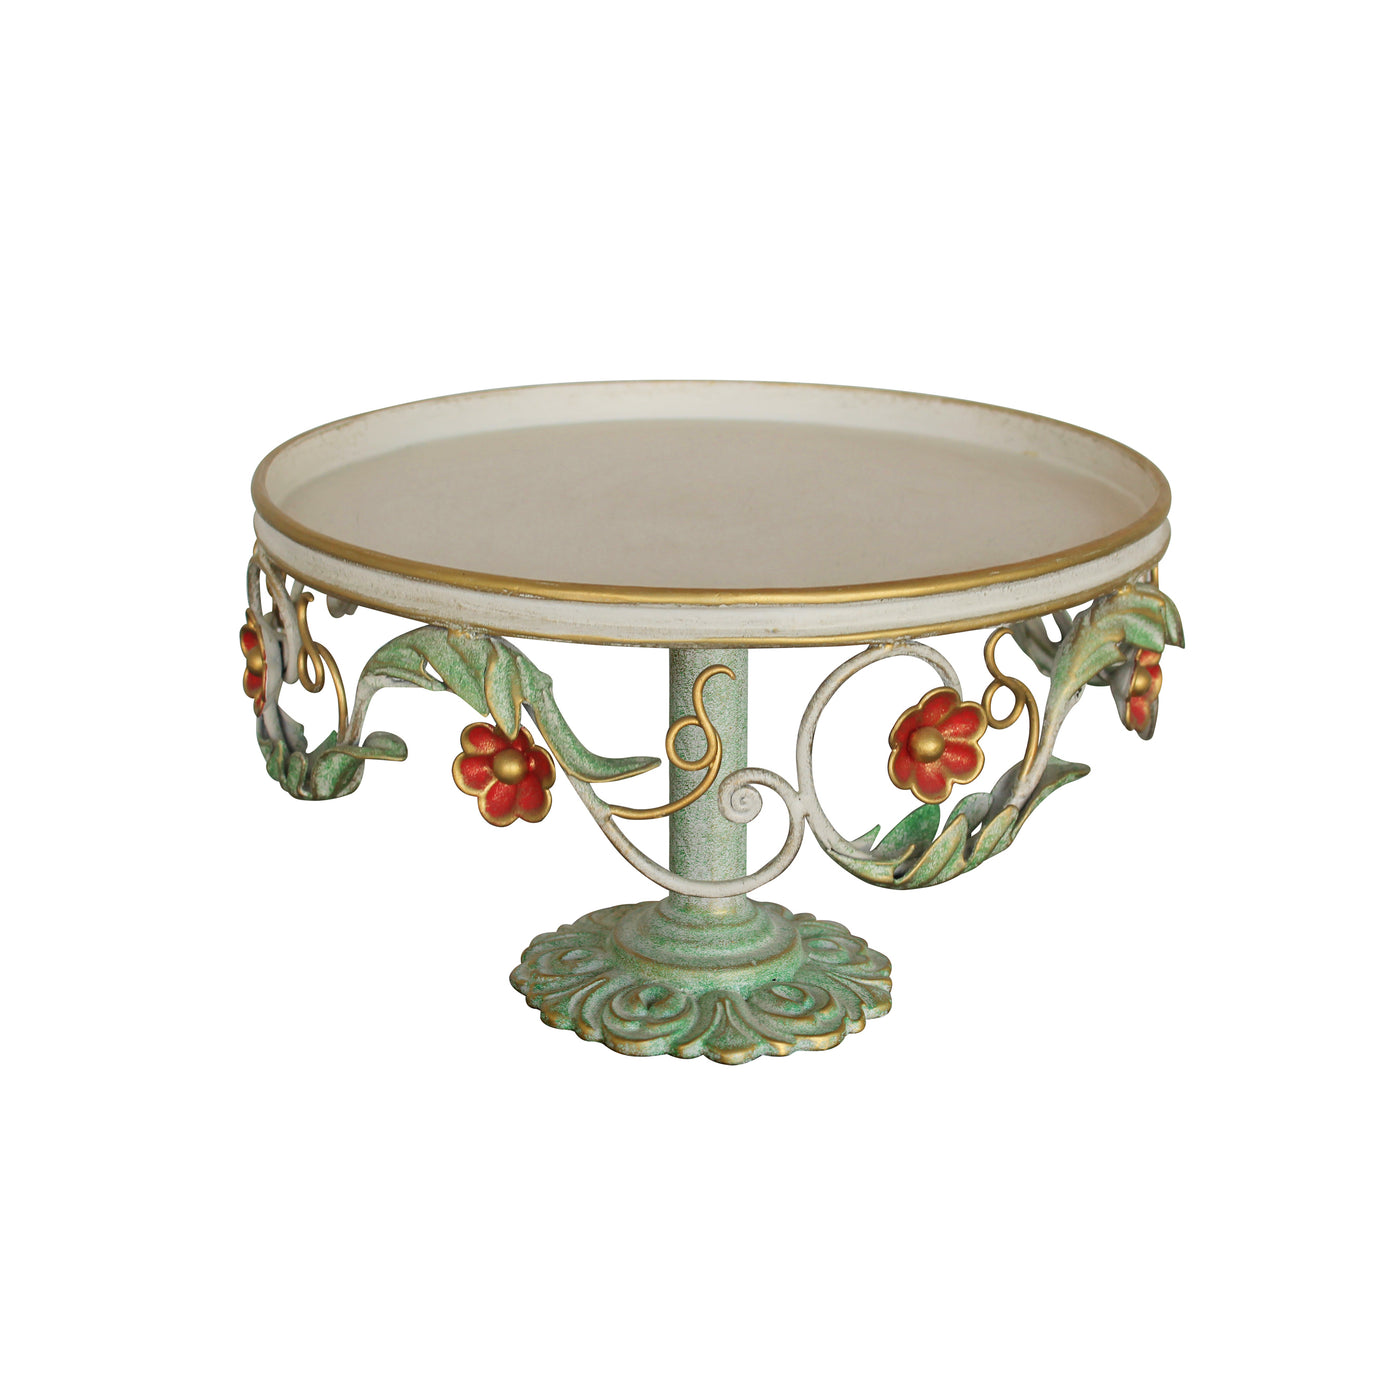 A round decorative cake stand with a base adorned with leaves and red flowers inspired from nature